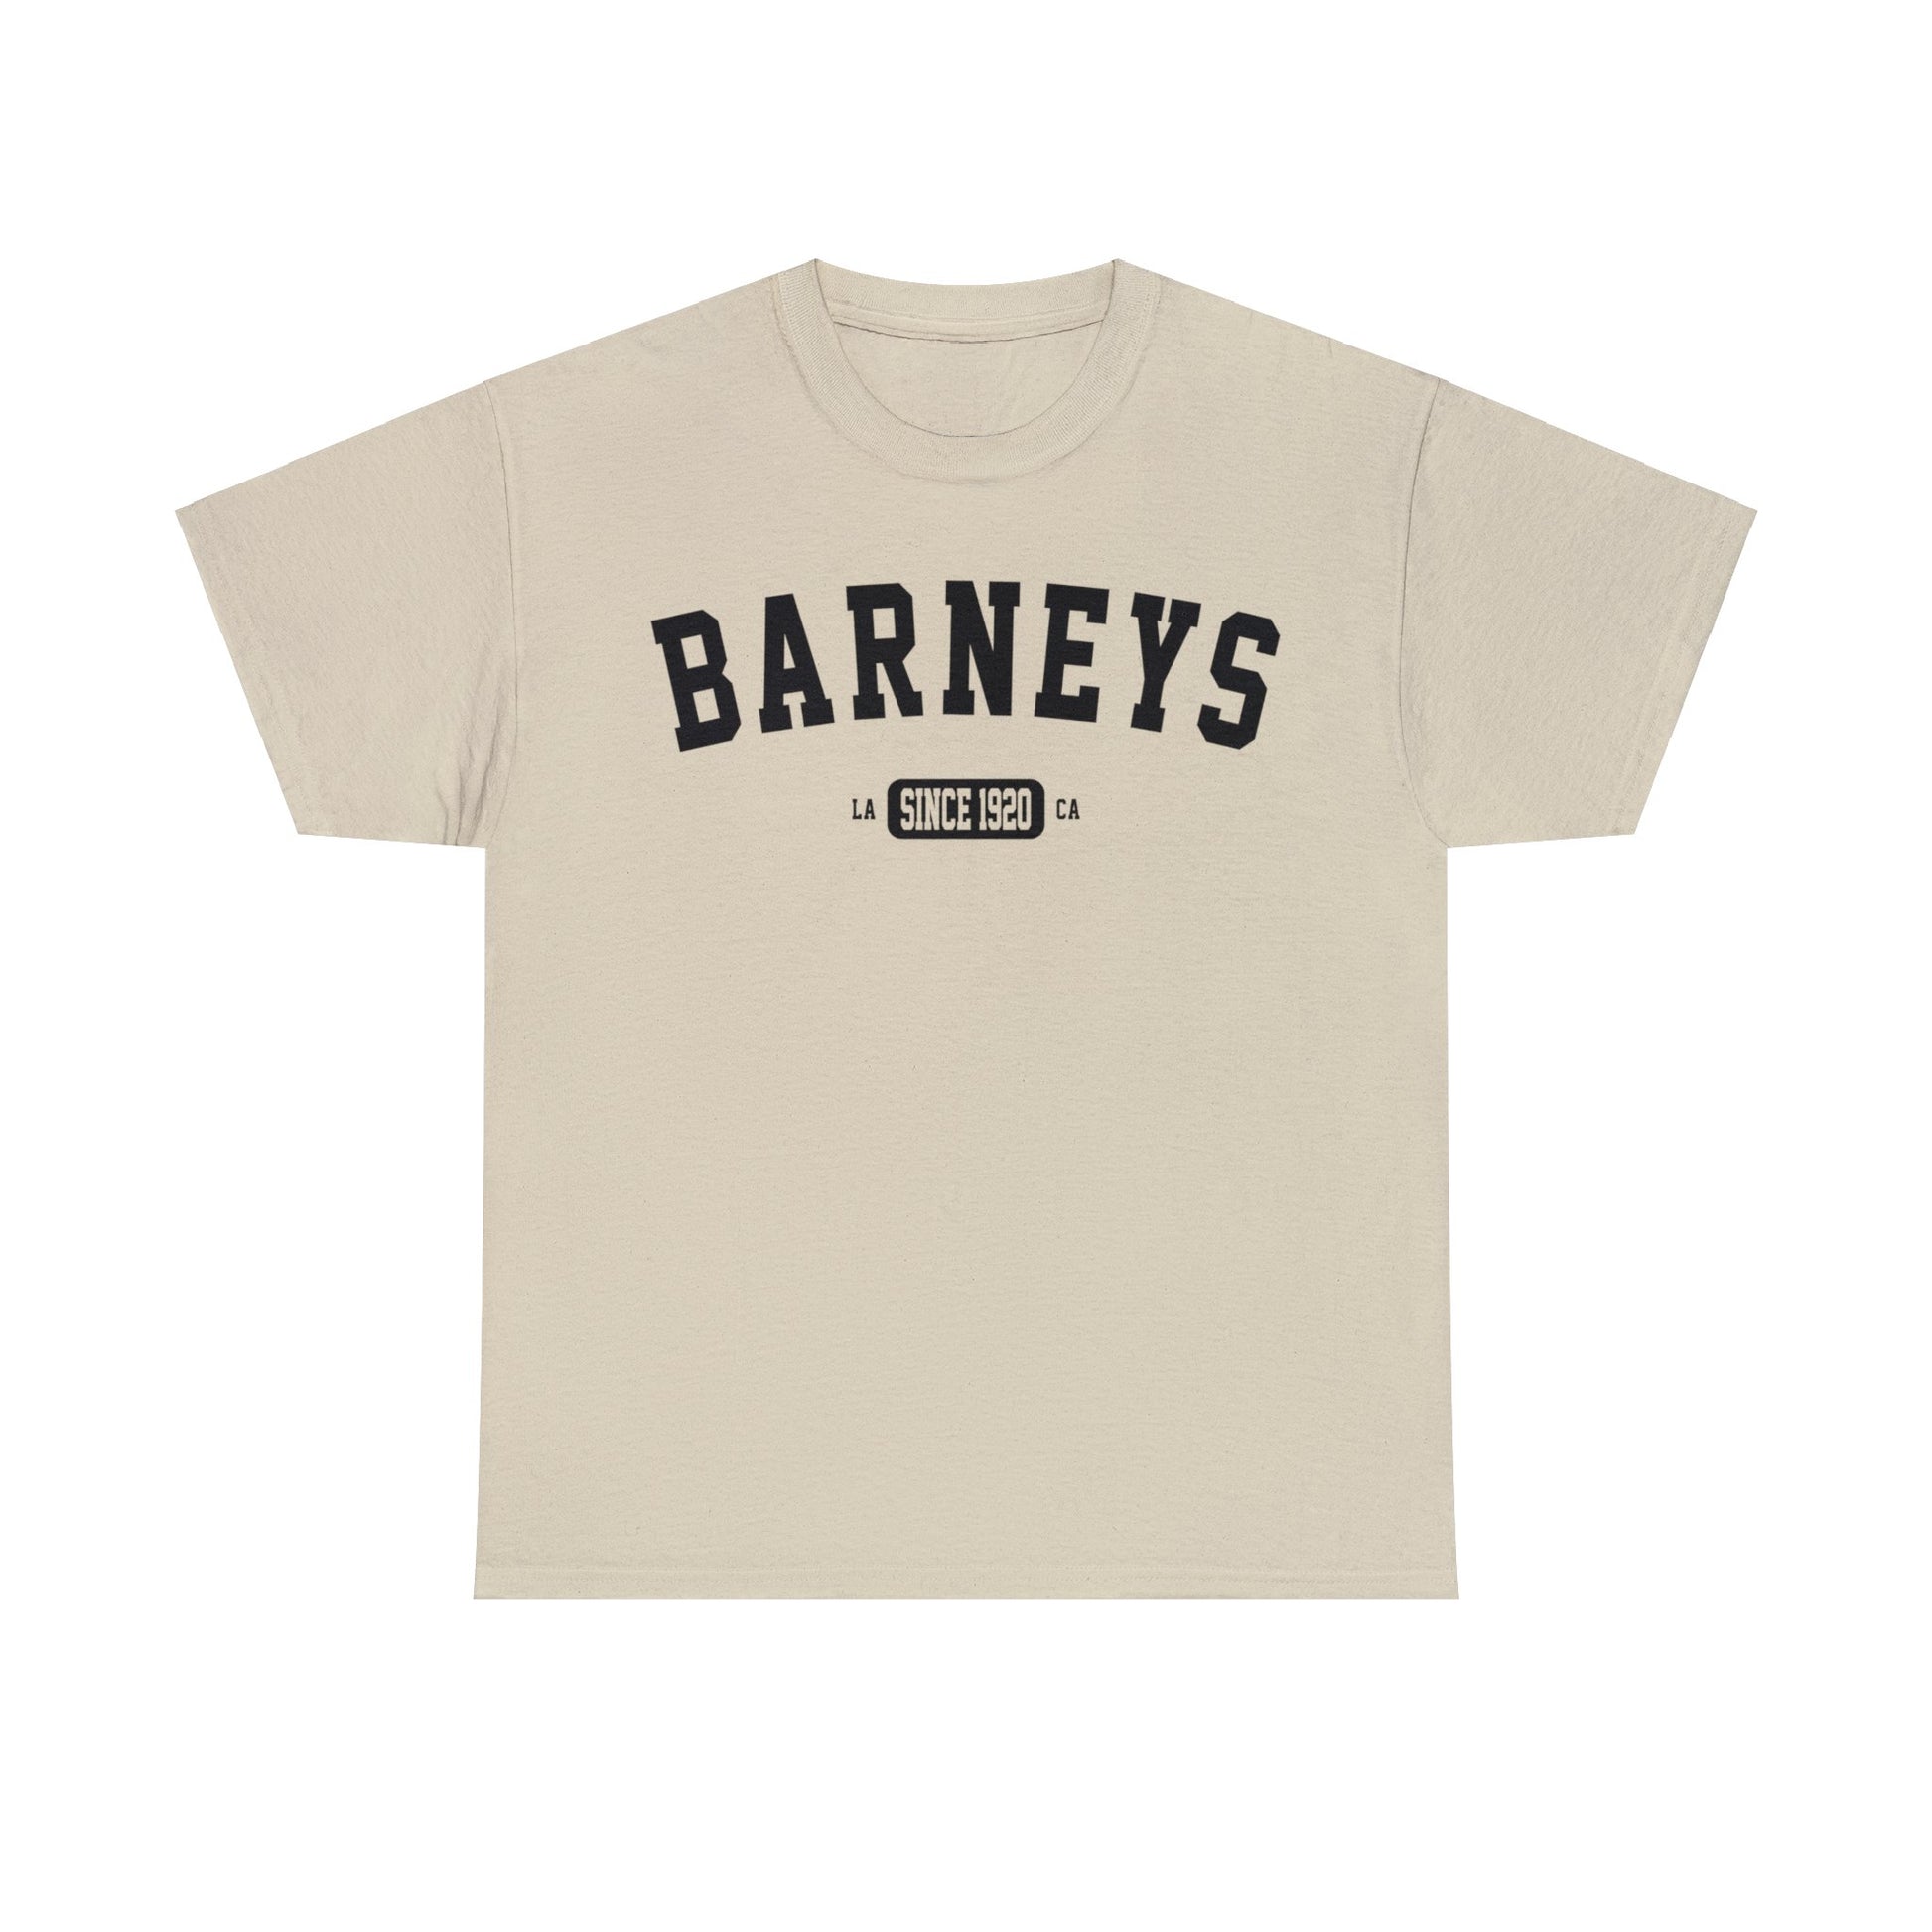 Vintage Collegiate | BARNEY'S BEANERY - Women's Graphic Tee | Sand Gildan 5000 T-Shirt, Black Graphic, Front View Flat Lay